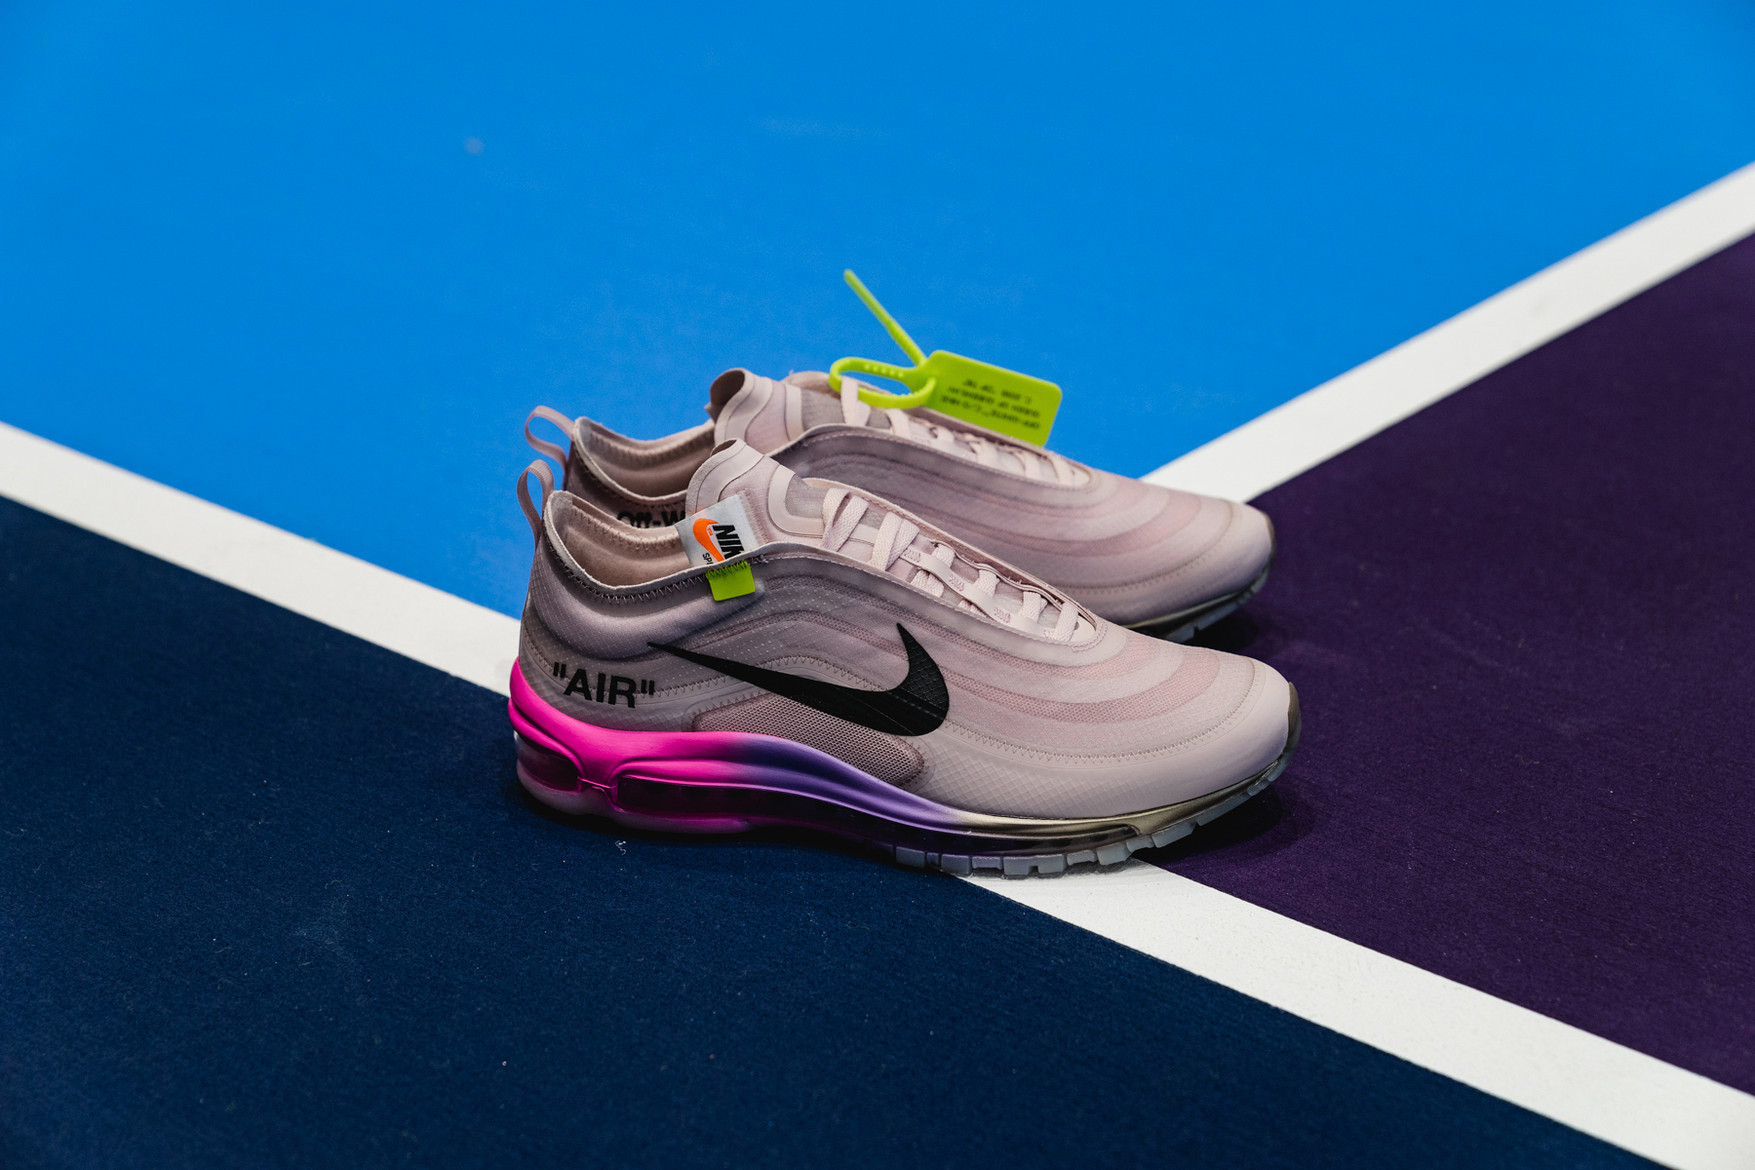 giay theo thao dat nhat q3.2018 - Off-White x Nike Air Max 97 “Queen” - elle man